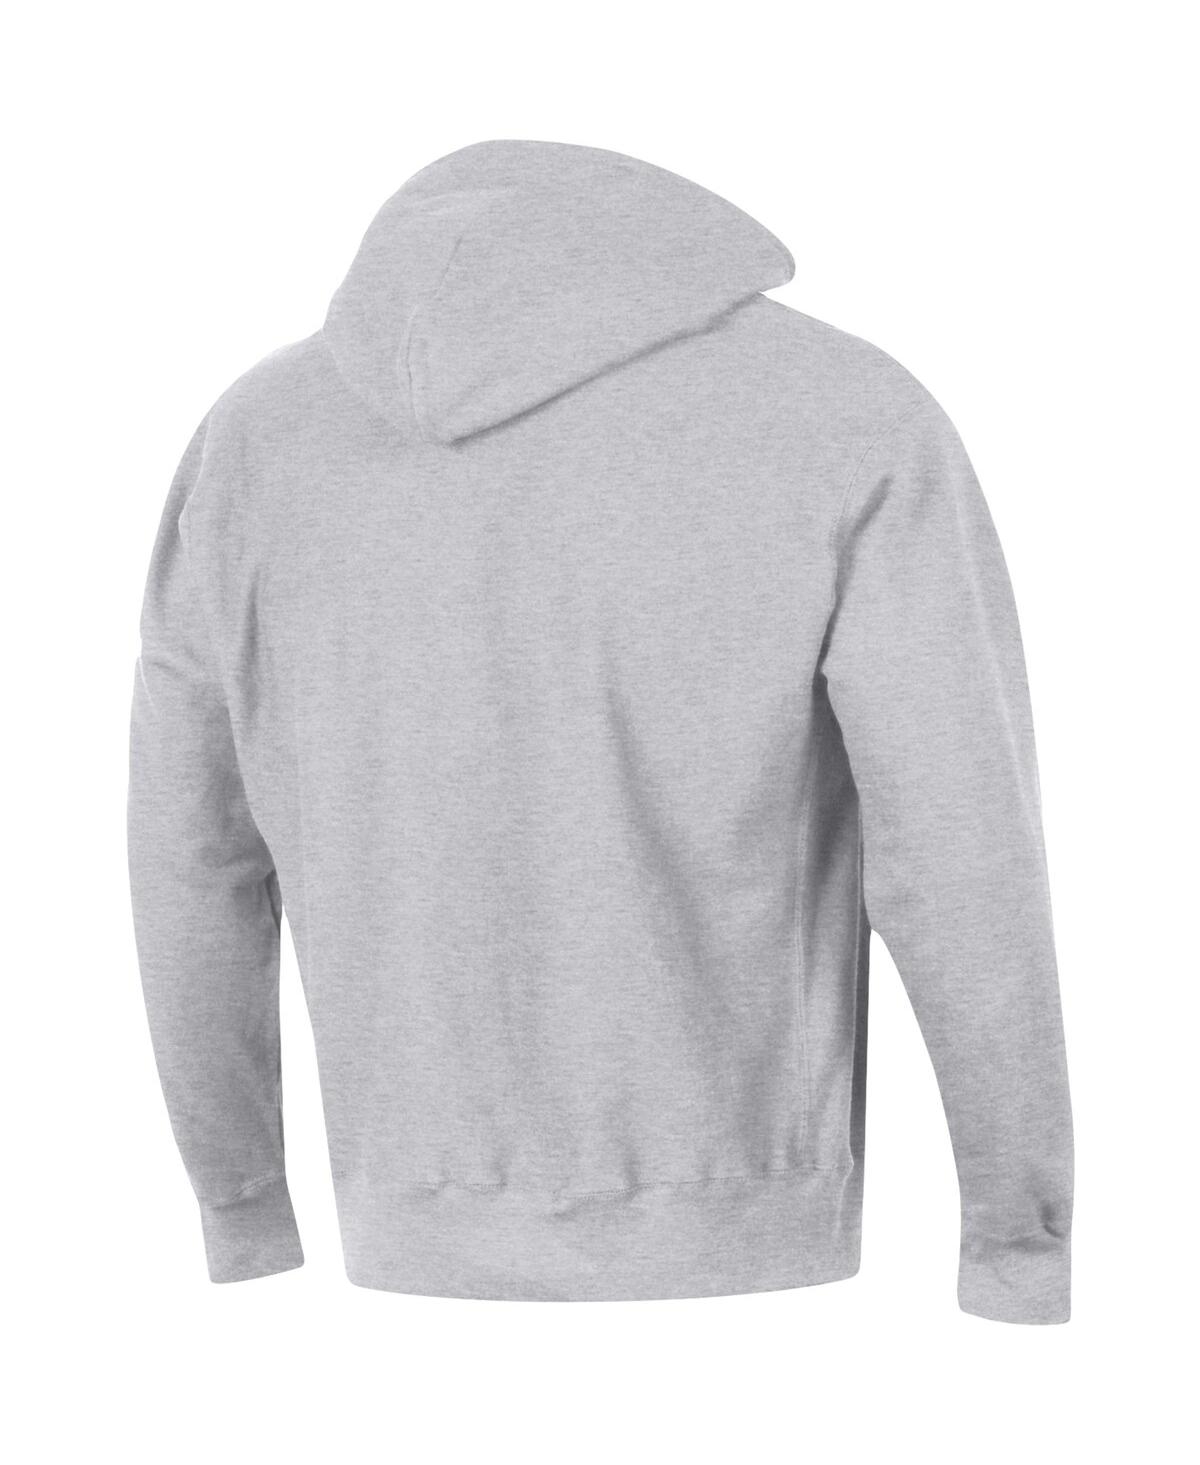 Shop Champion Men's  Heathered Gray Indiana Hoosiers Big And Tall Reverse Weave Fleece Pullover Hoodie Swe